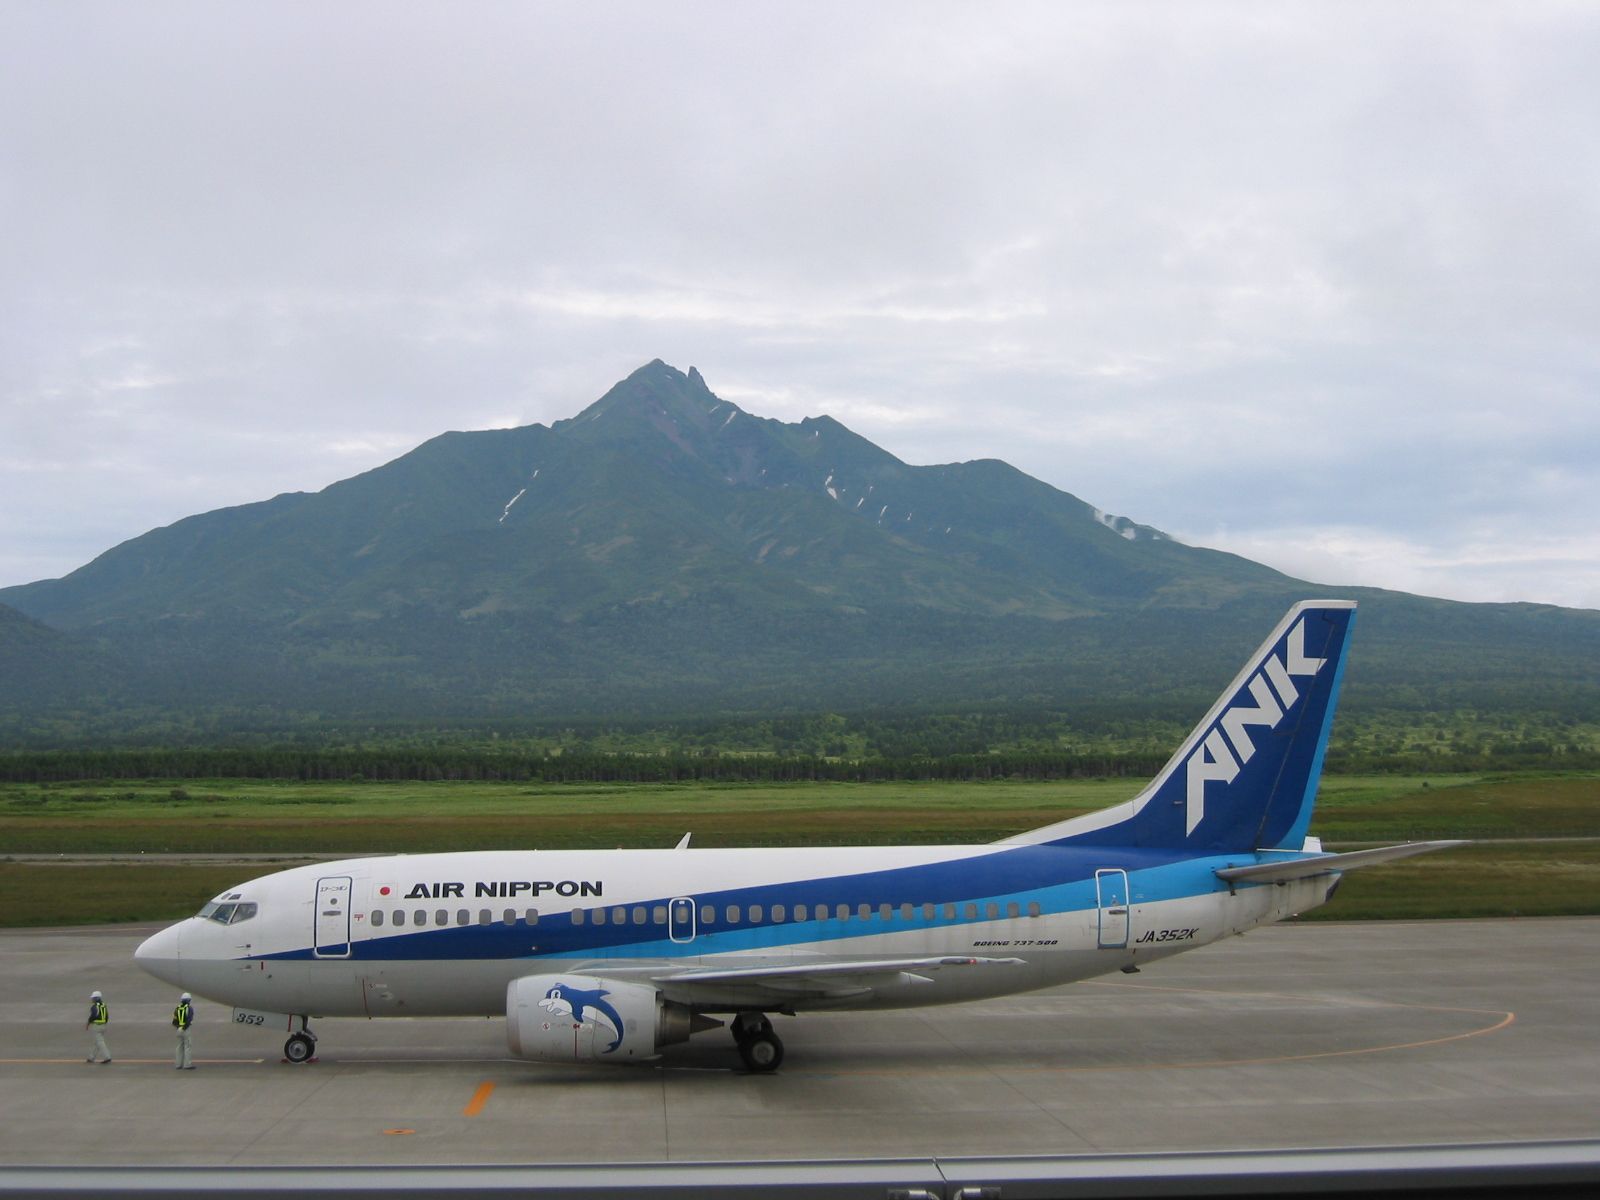 Boeing 737 400 Air Nippon Mountain Scenery Aircraft Wallpaper 2373